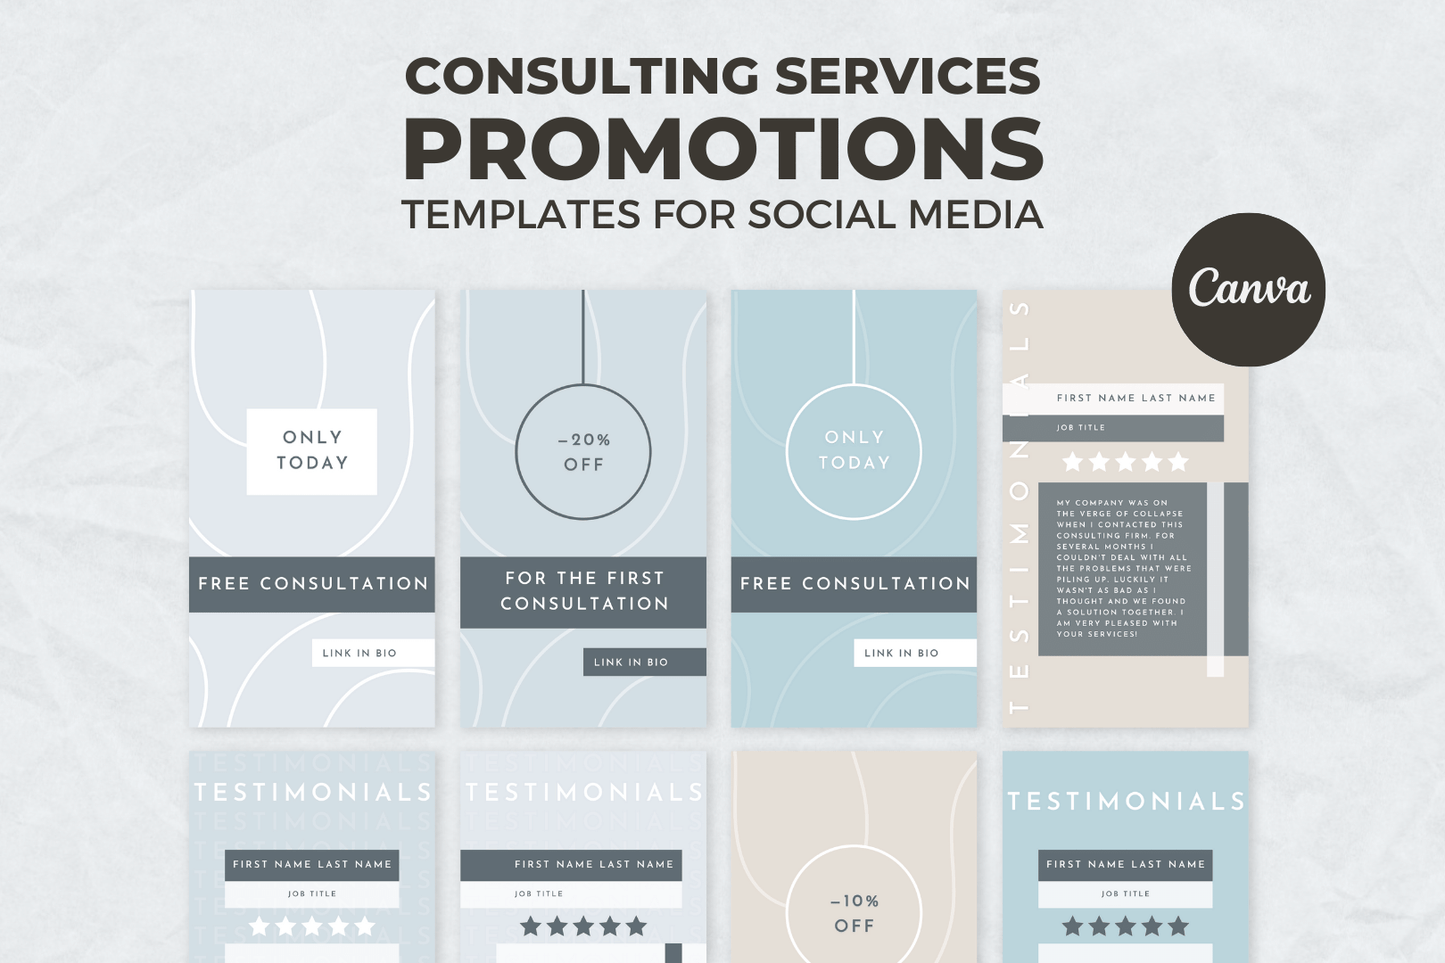 50 Promotional Stories for Consulting Services